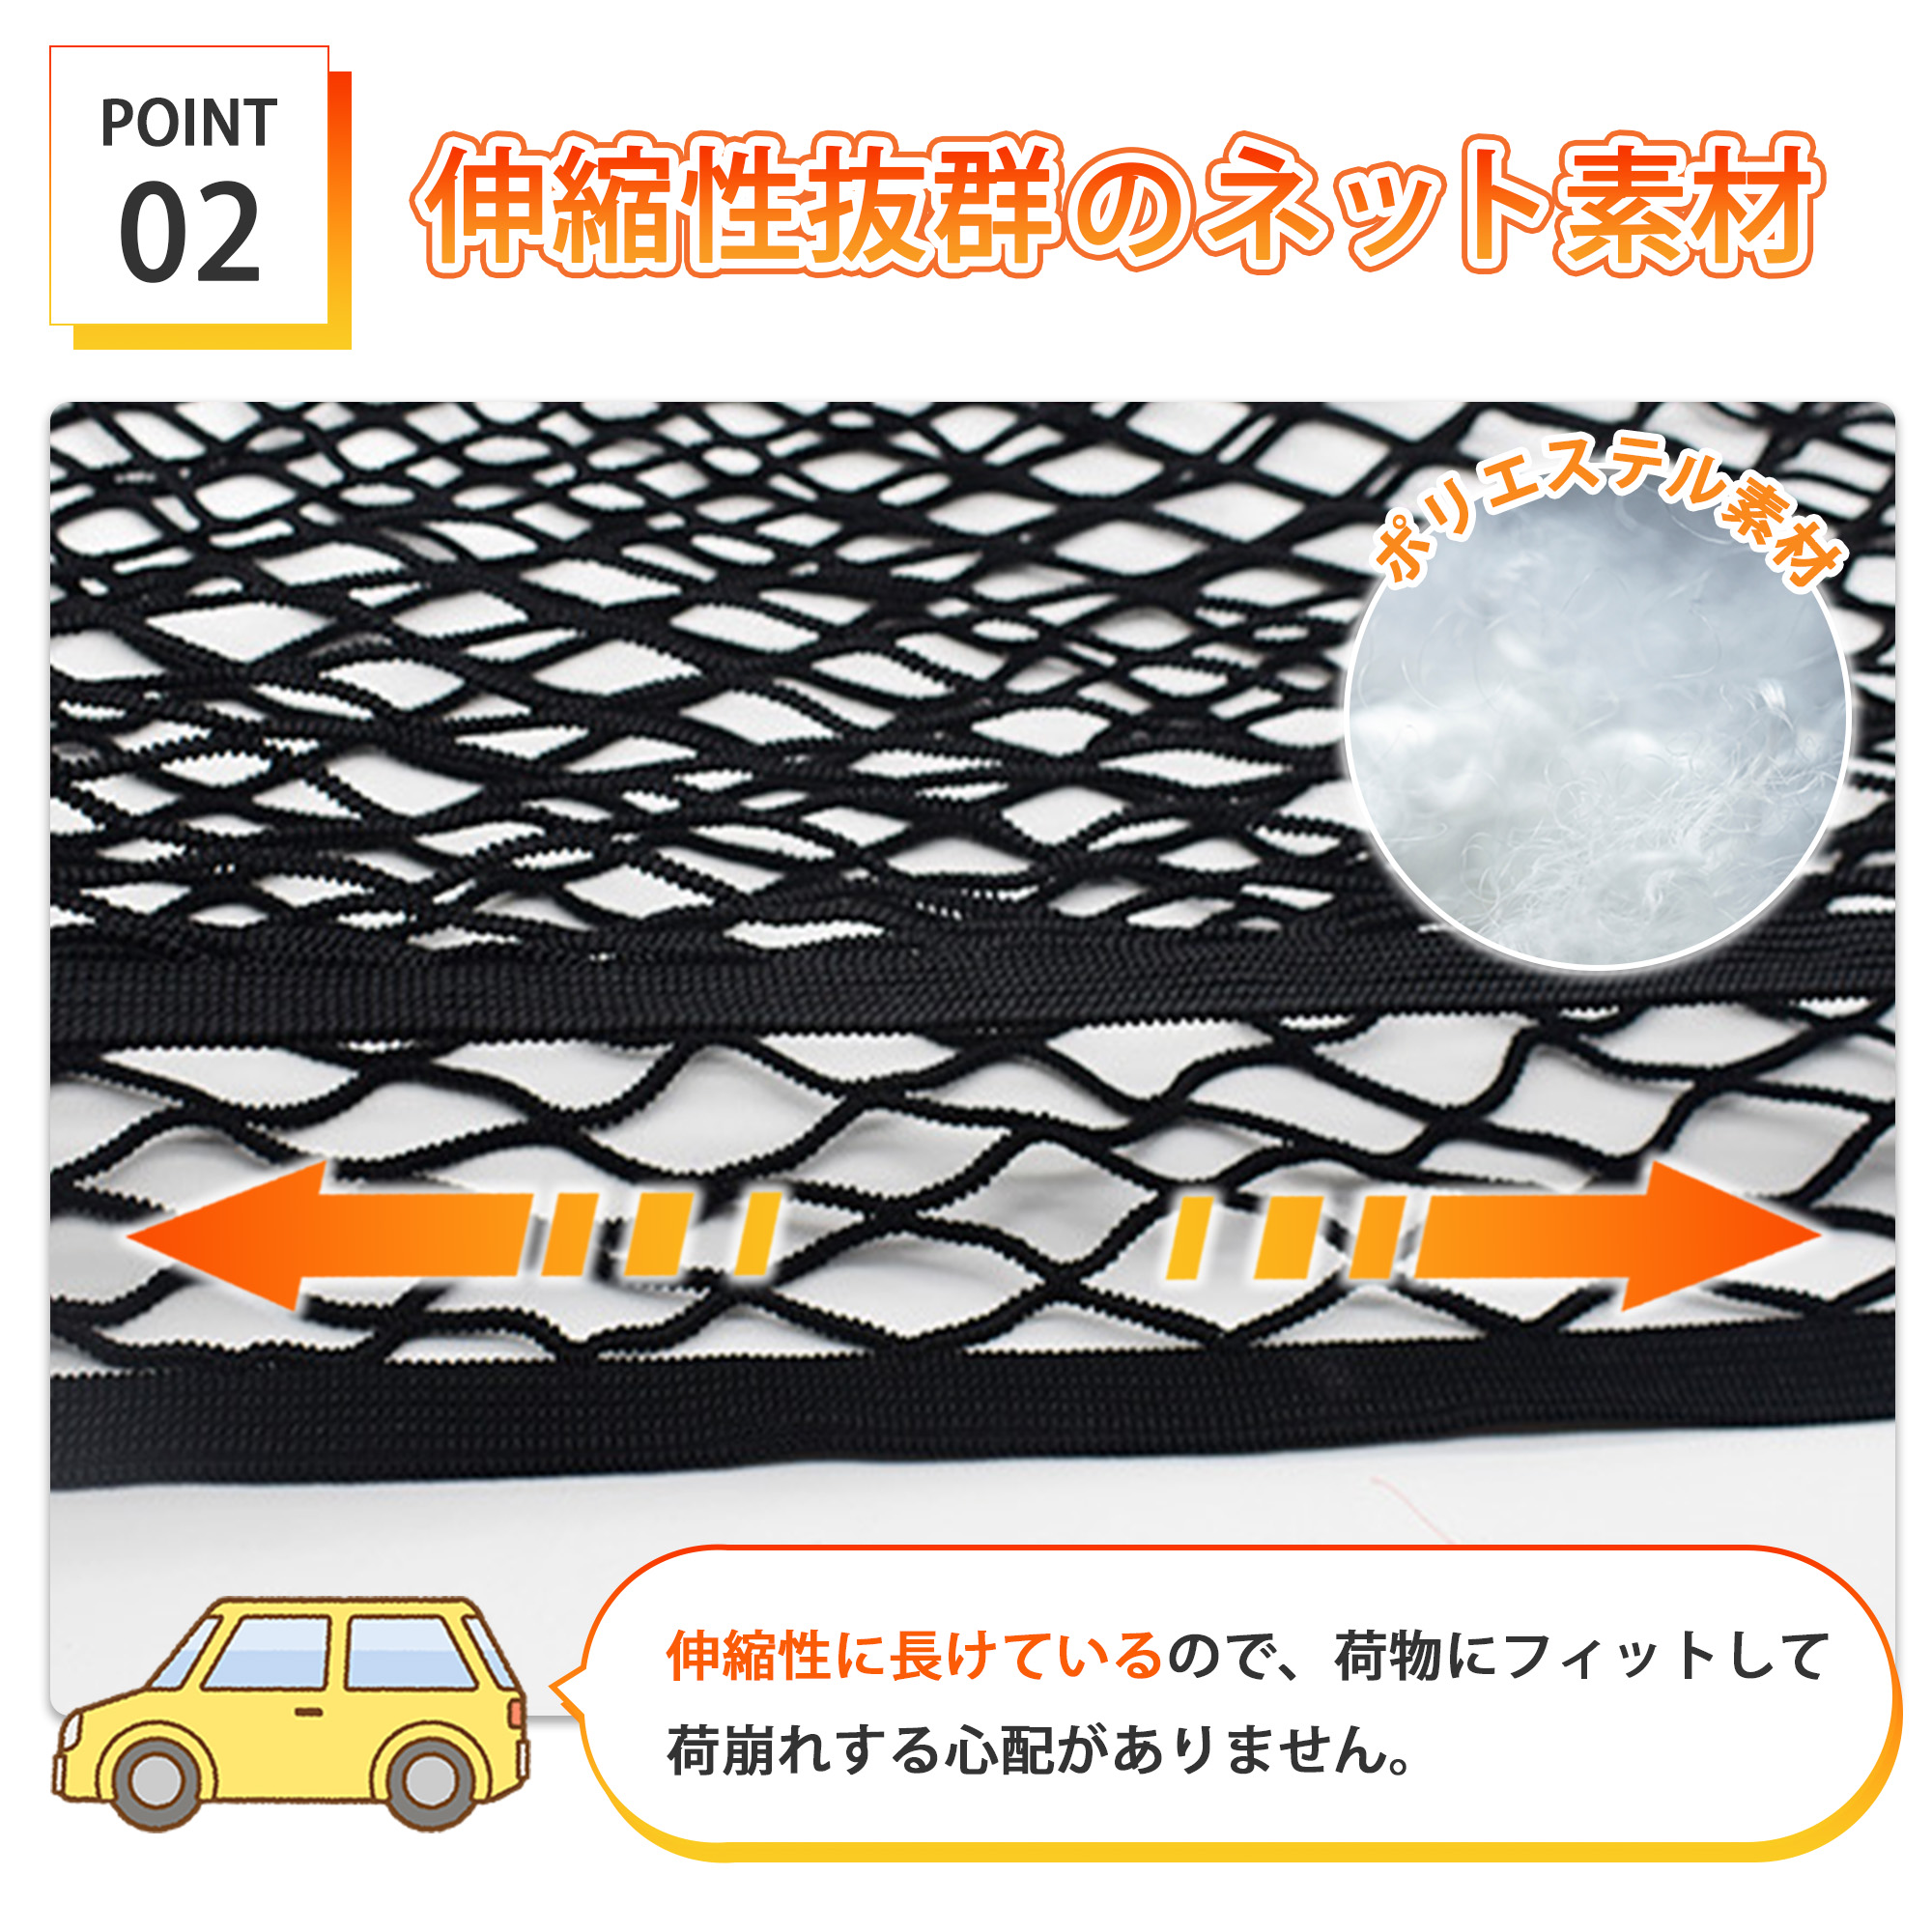  luggage net car trunk storage cargo net car supplies convenience goods stylish hook anti-theft crime prevention luggage net black rubber cover adjustment handle 